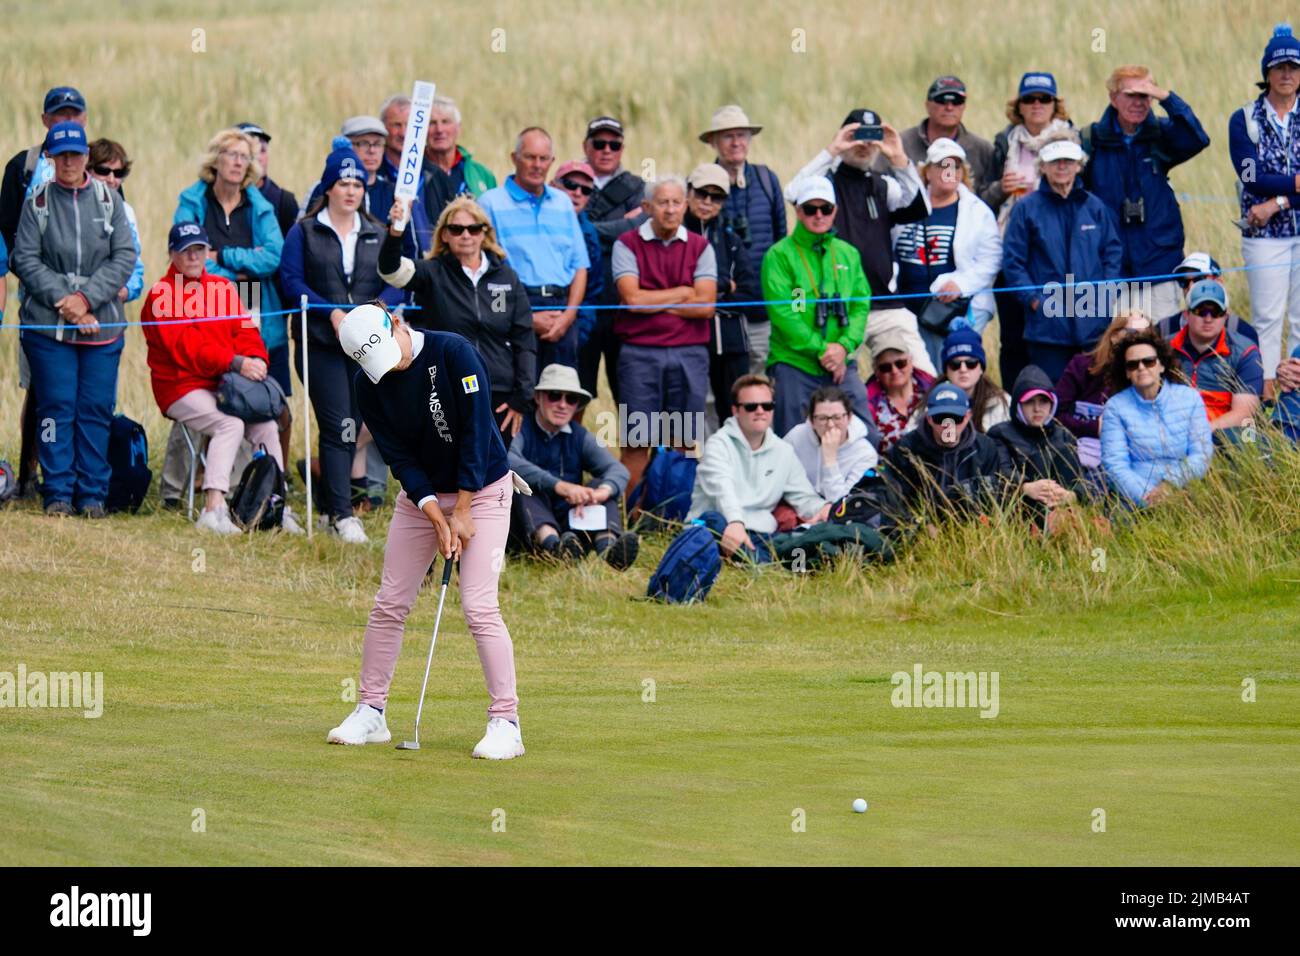 Gullane, Scotland, UK. 5th August 2022. Second round of the AIG Women’s Open golf championship at Muirfield in East Lothian. Pic; Hinako Shibuno putting on the 13th green.  Iain Masterton/Alamy Live News Stock Photo